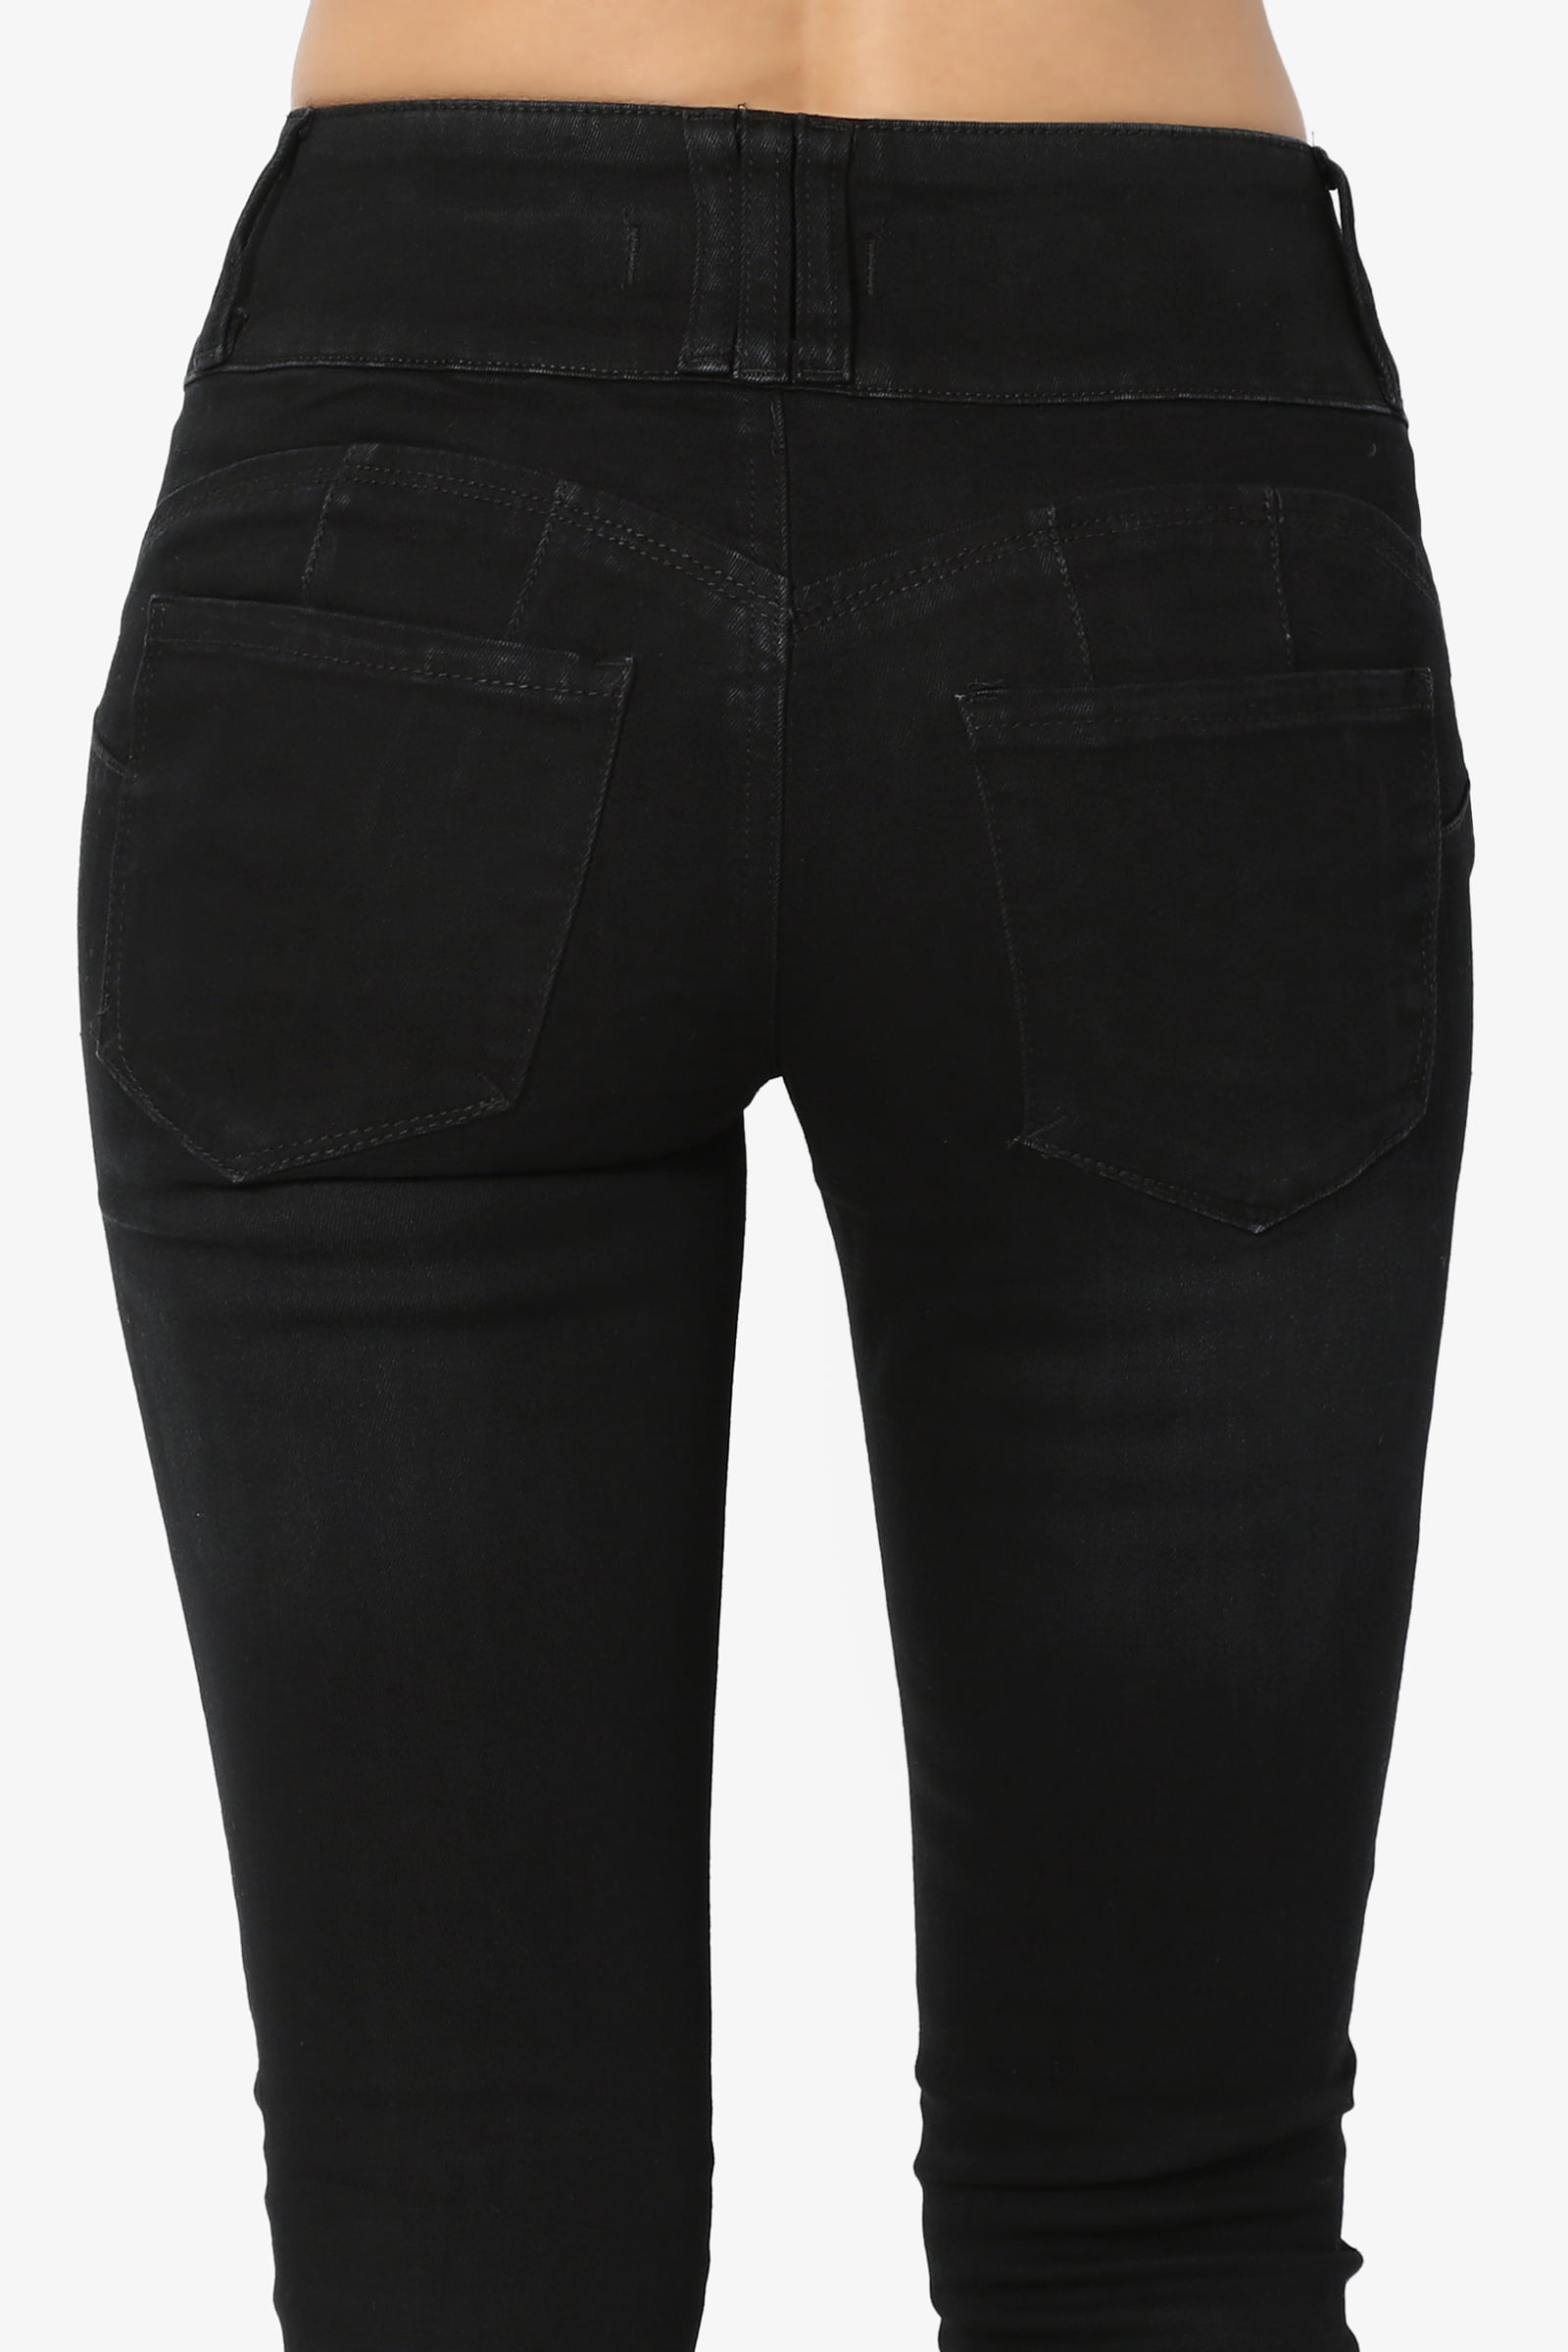 TheMogan Sweetheart Darted Hip Butt Lifting Mid Rise Distressed Skinny Jeans 